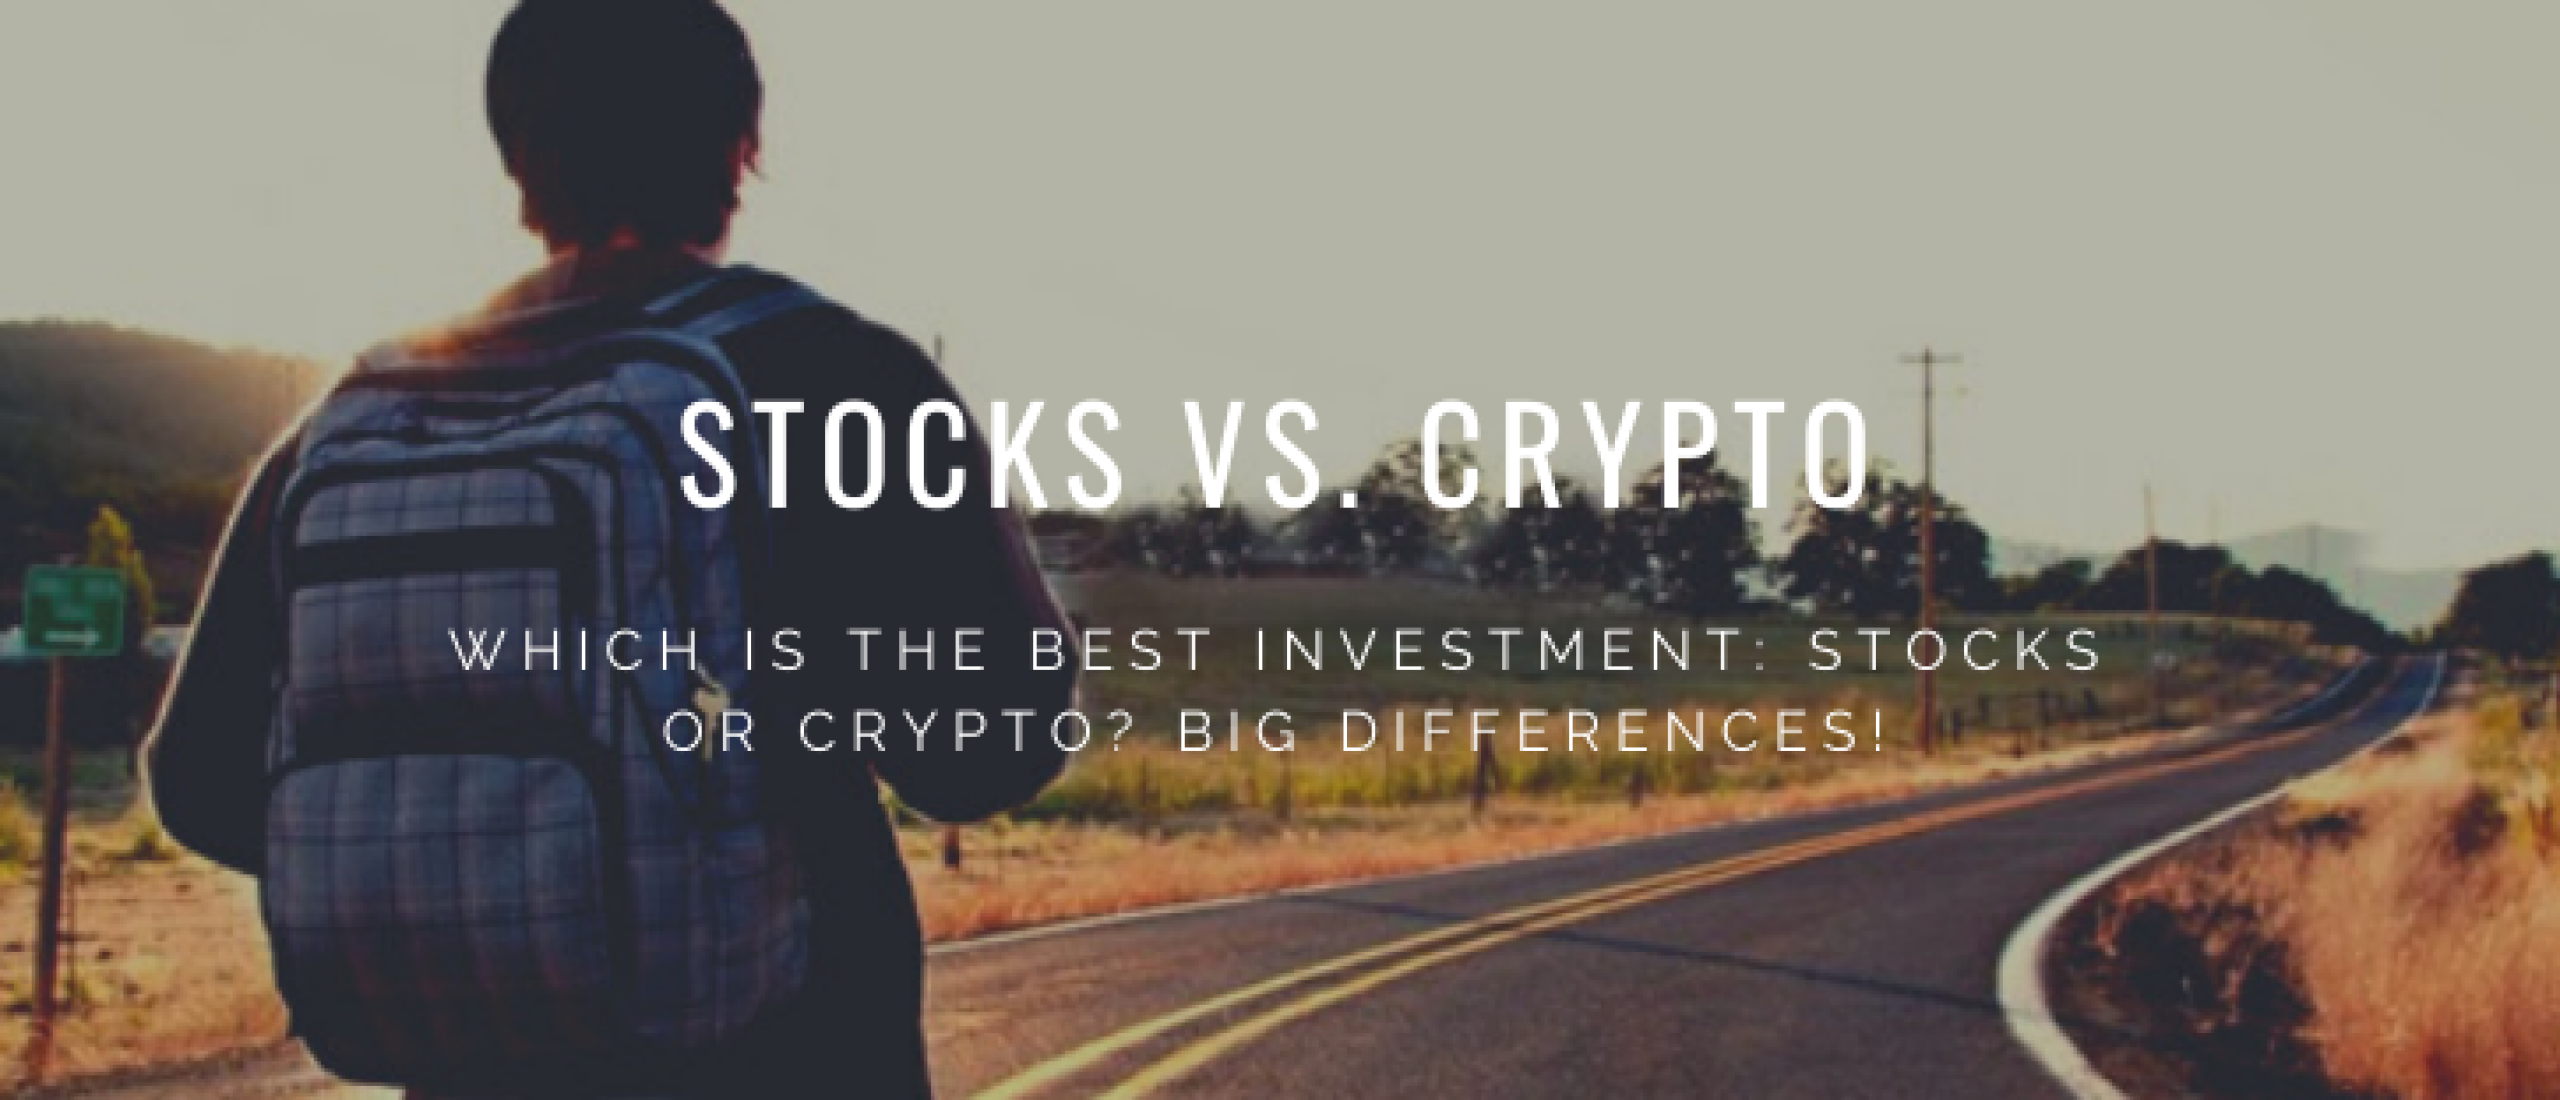 Stocks or Crypto Investing? Big Difference in Loss & Profit [2022]